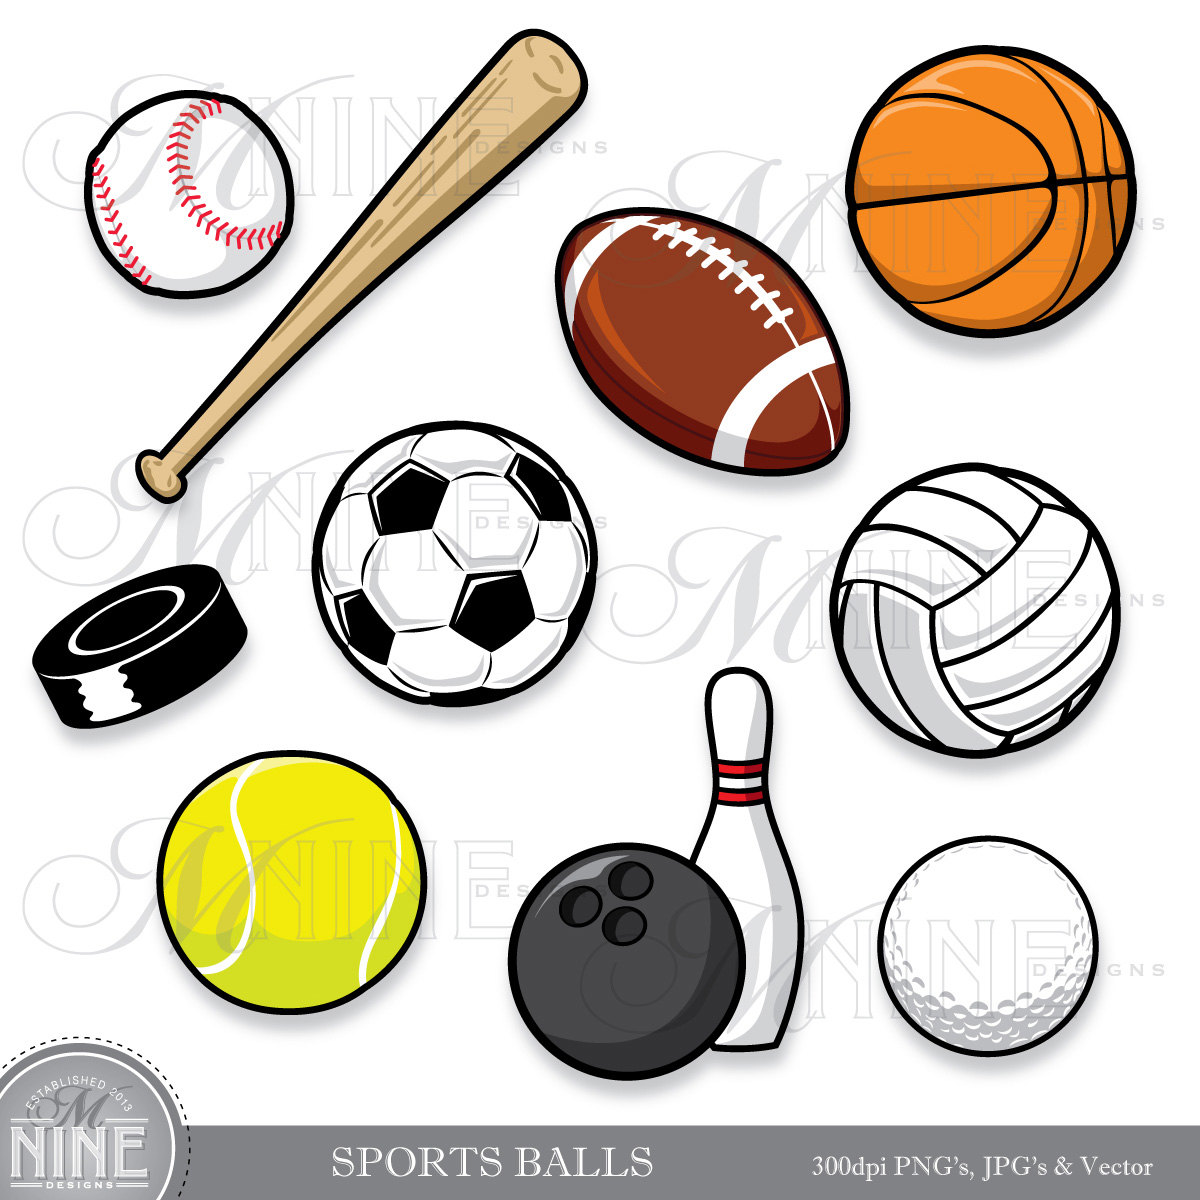 Soccer Clipart Royalty FREE S